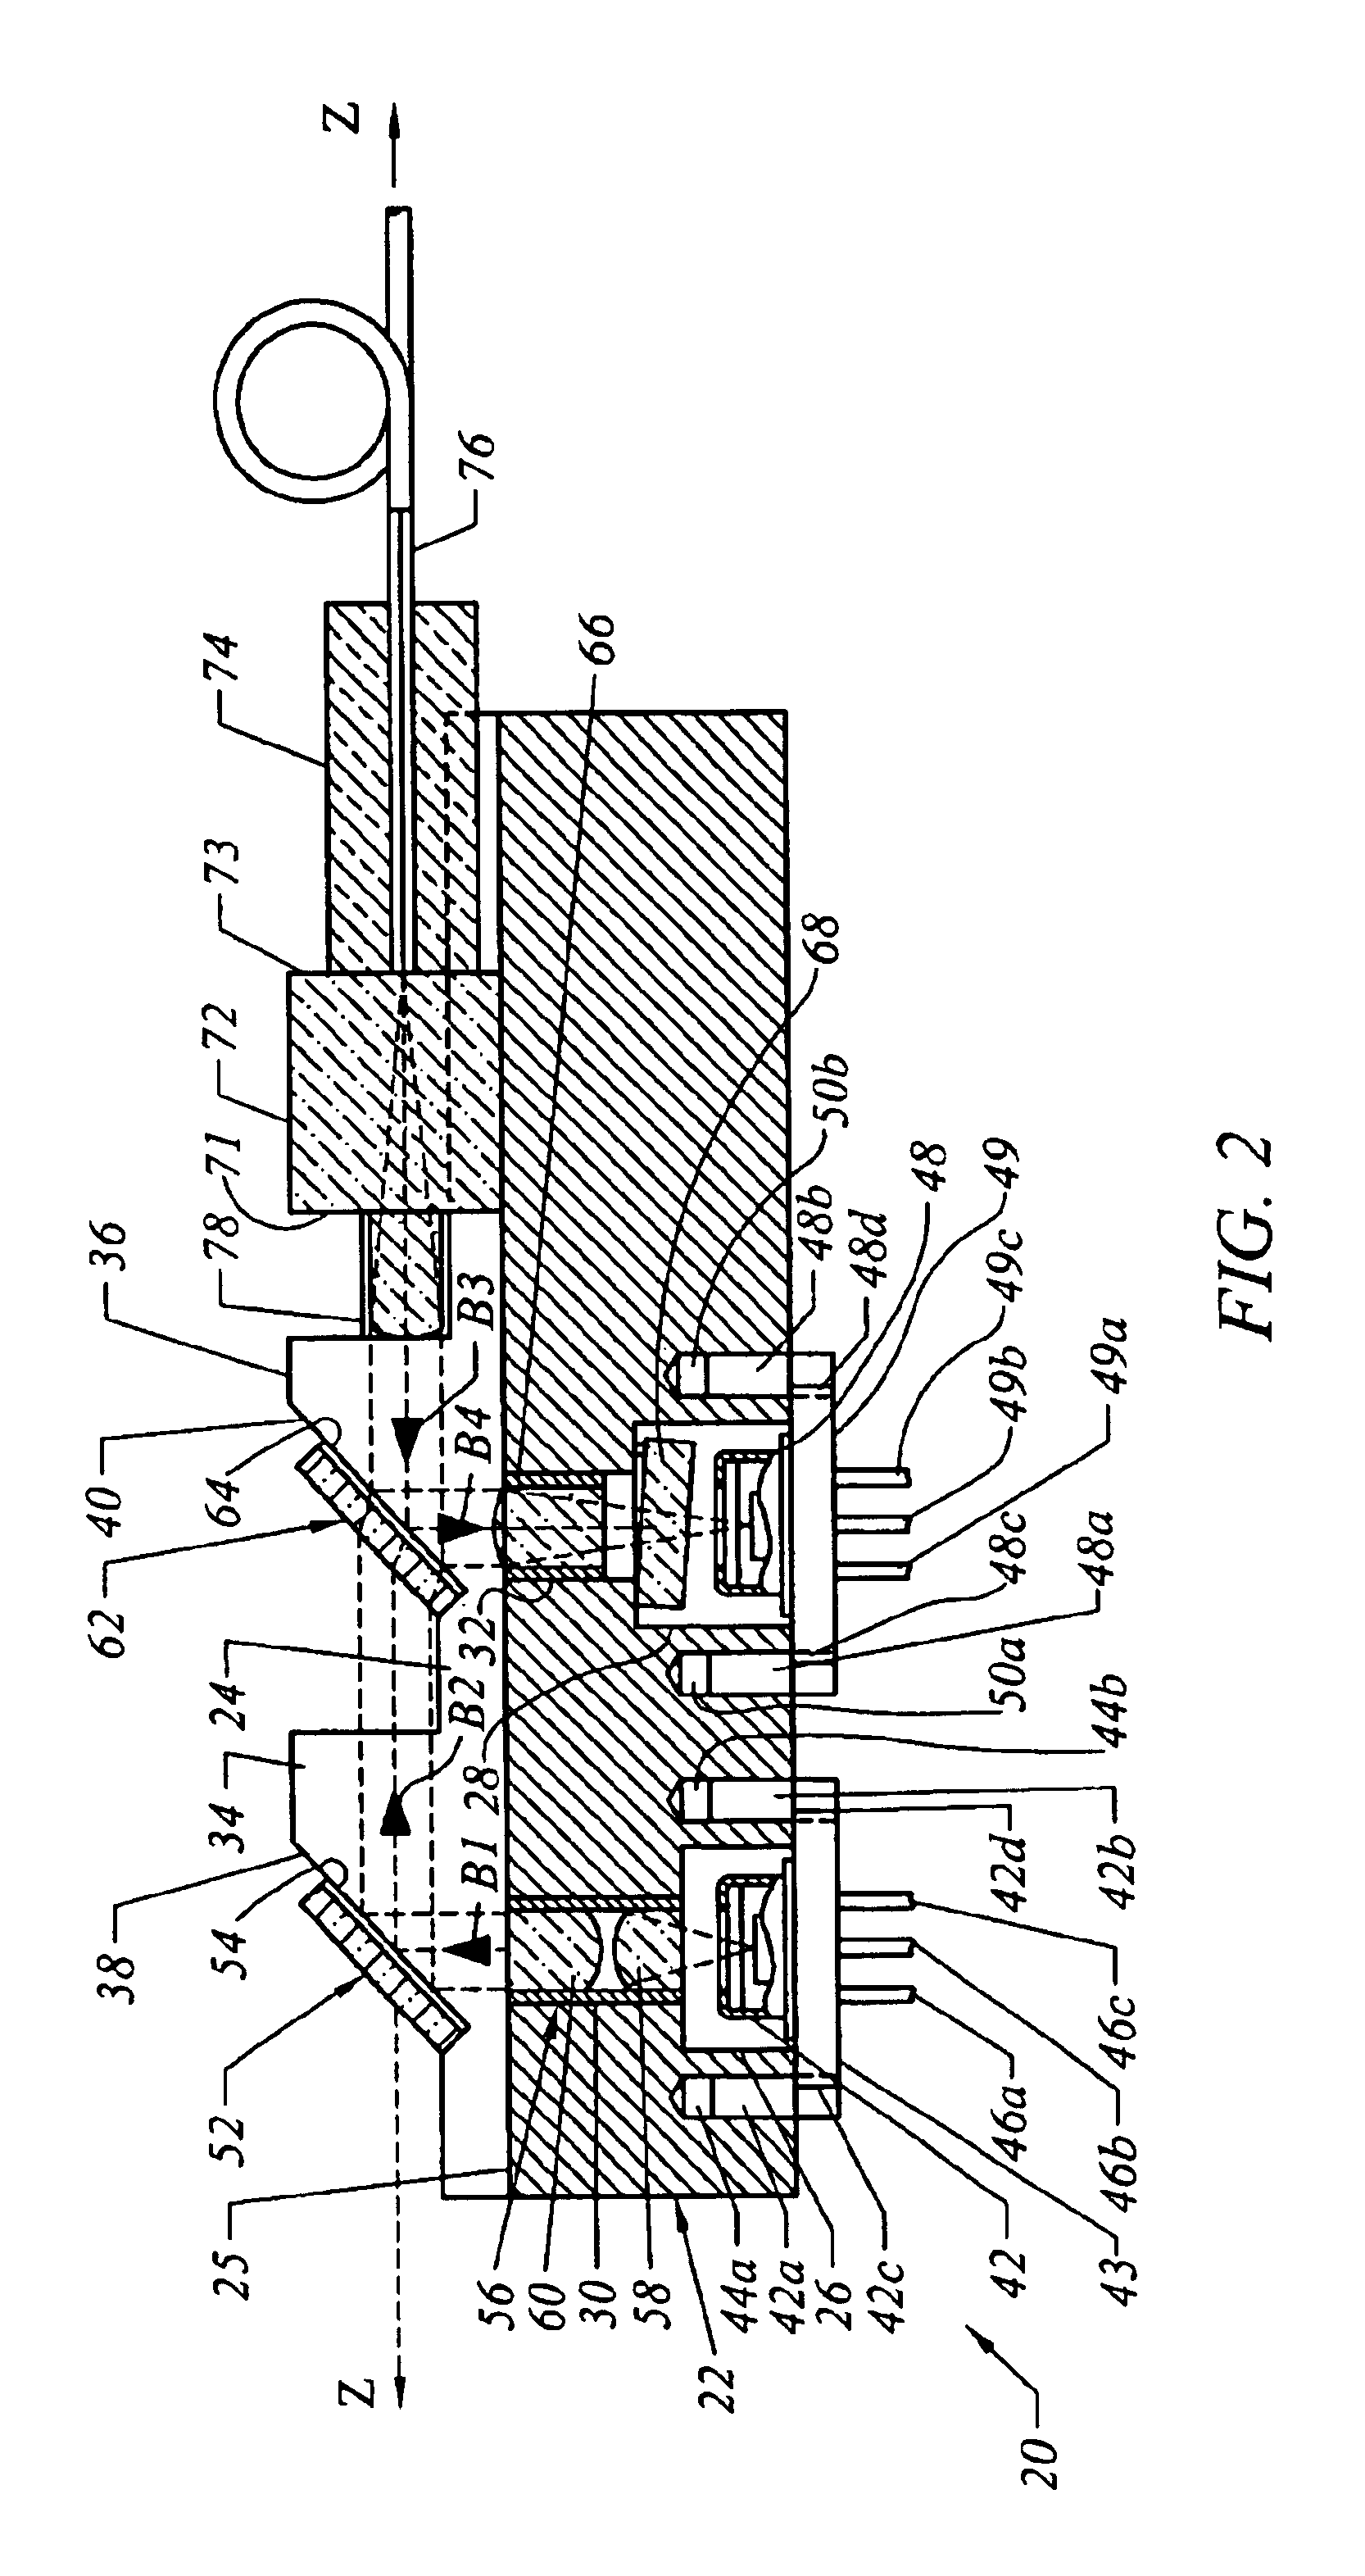 Optical module for high-speed bidirectional transceiver